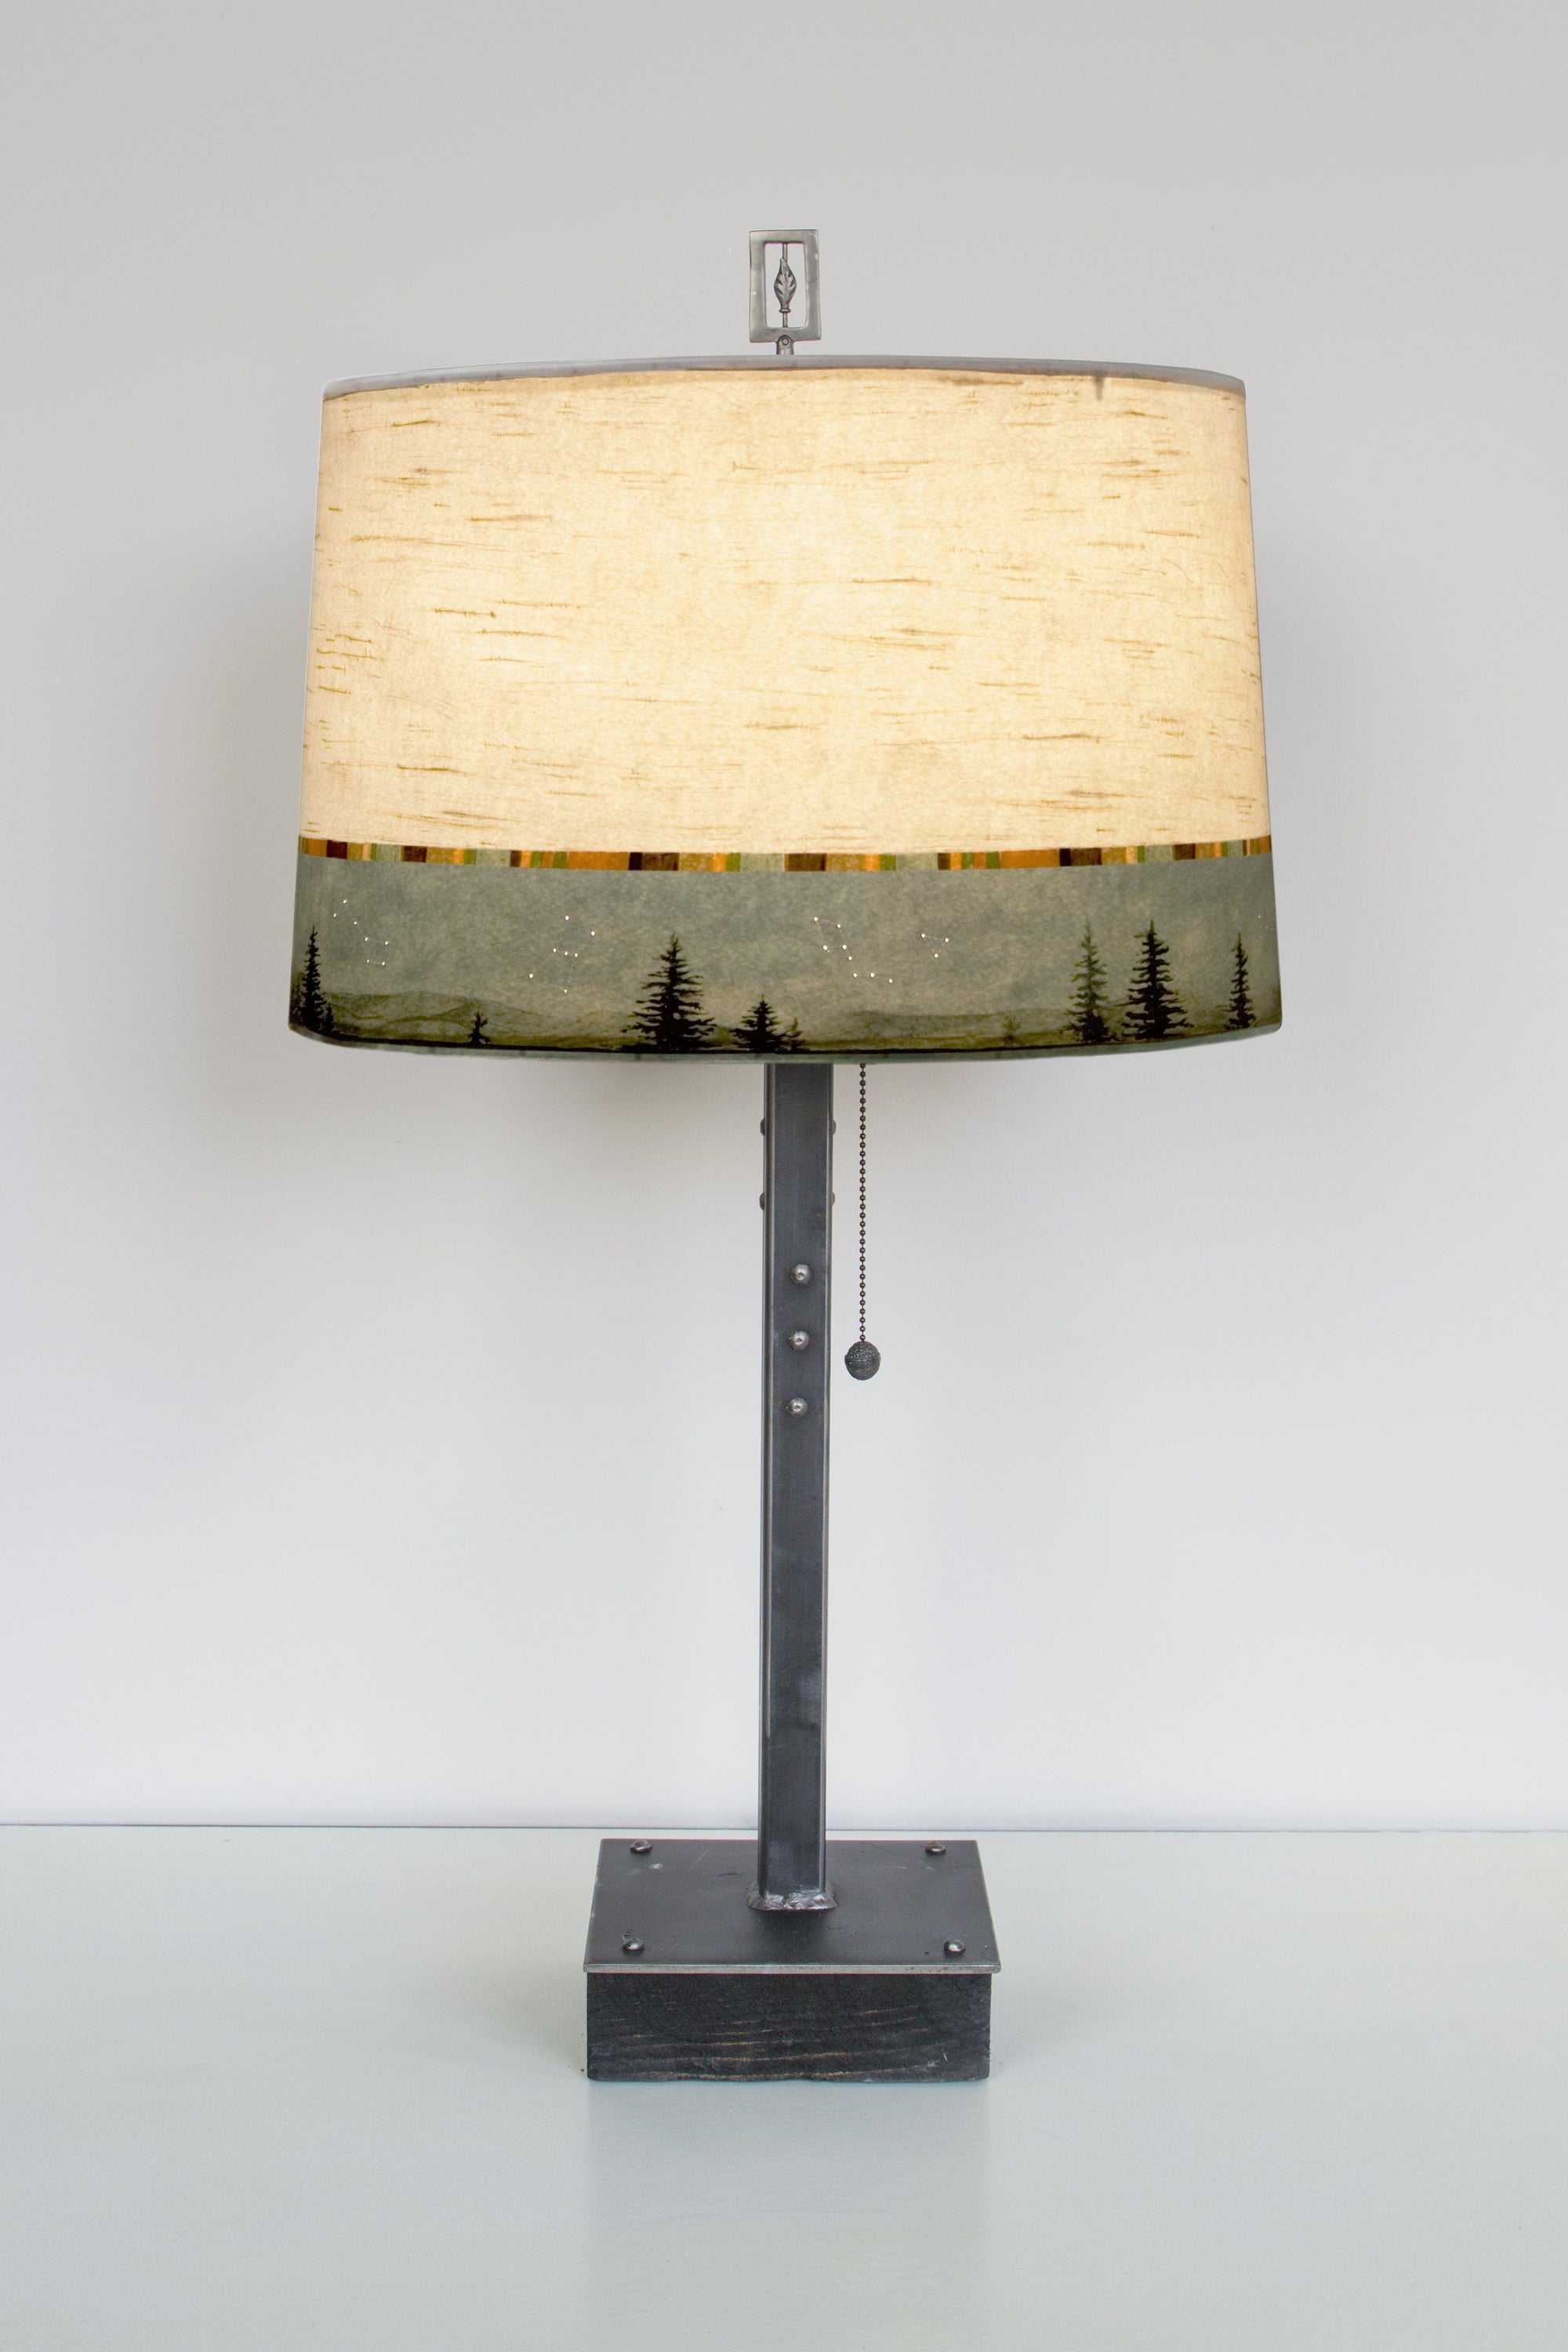 Janna Ugone & Co Table Lamps Steel Table Lamp on Wood with Large Drum Shade in Birch Midnight